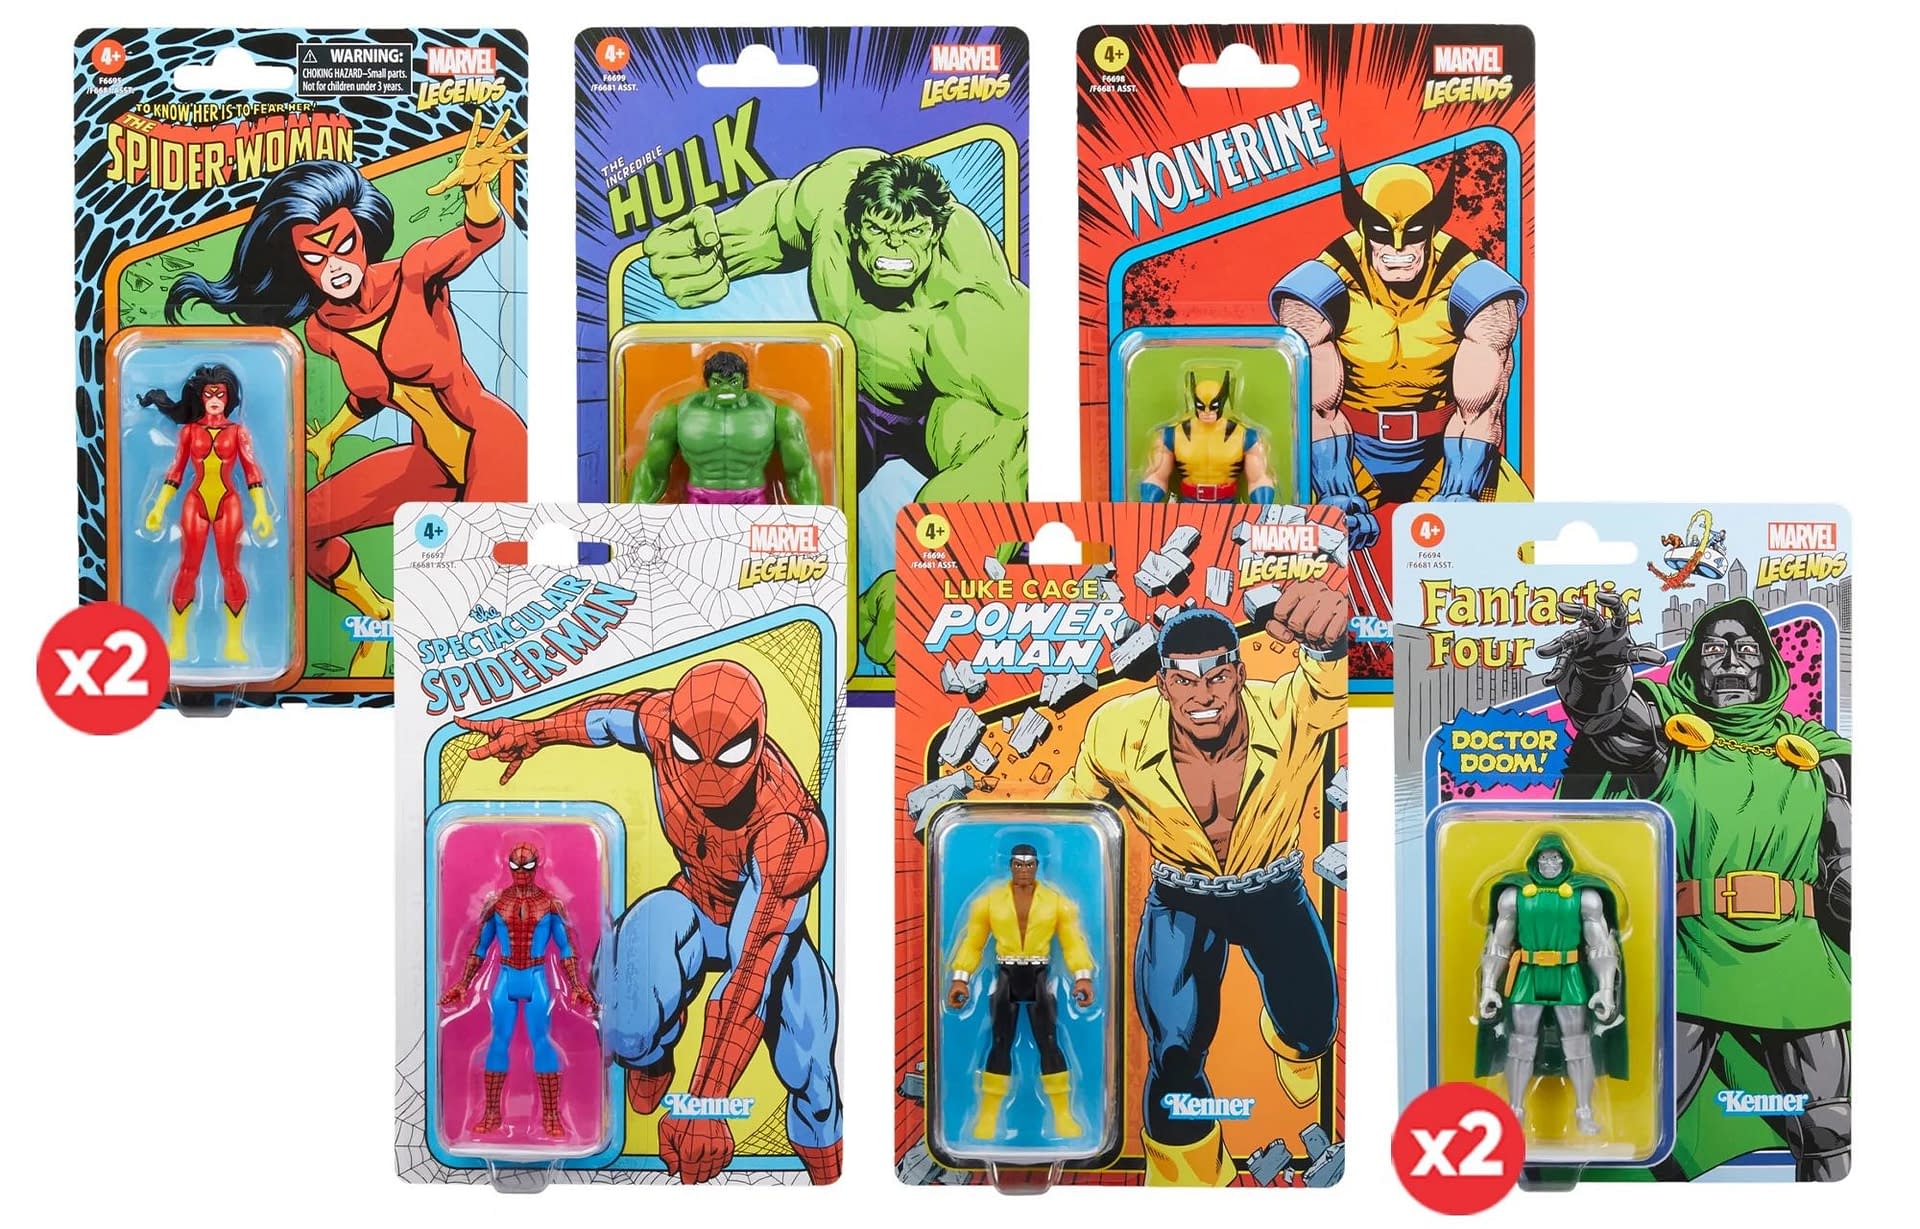 New Marvel Legends Retro 375 Figures Coming Soon from Hasbro